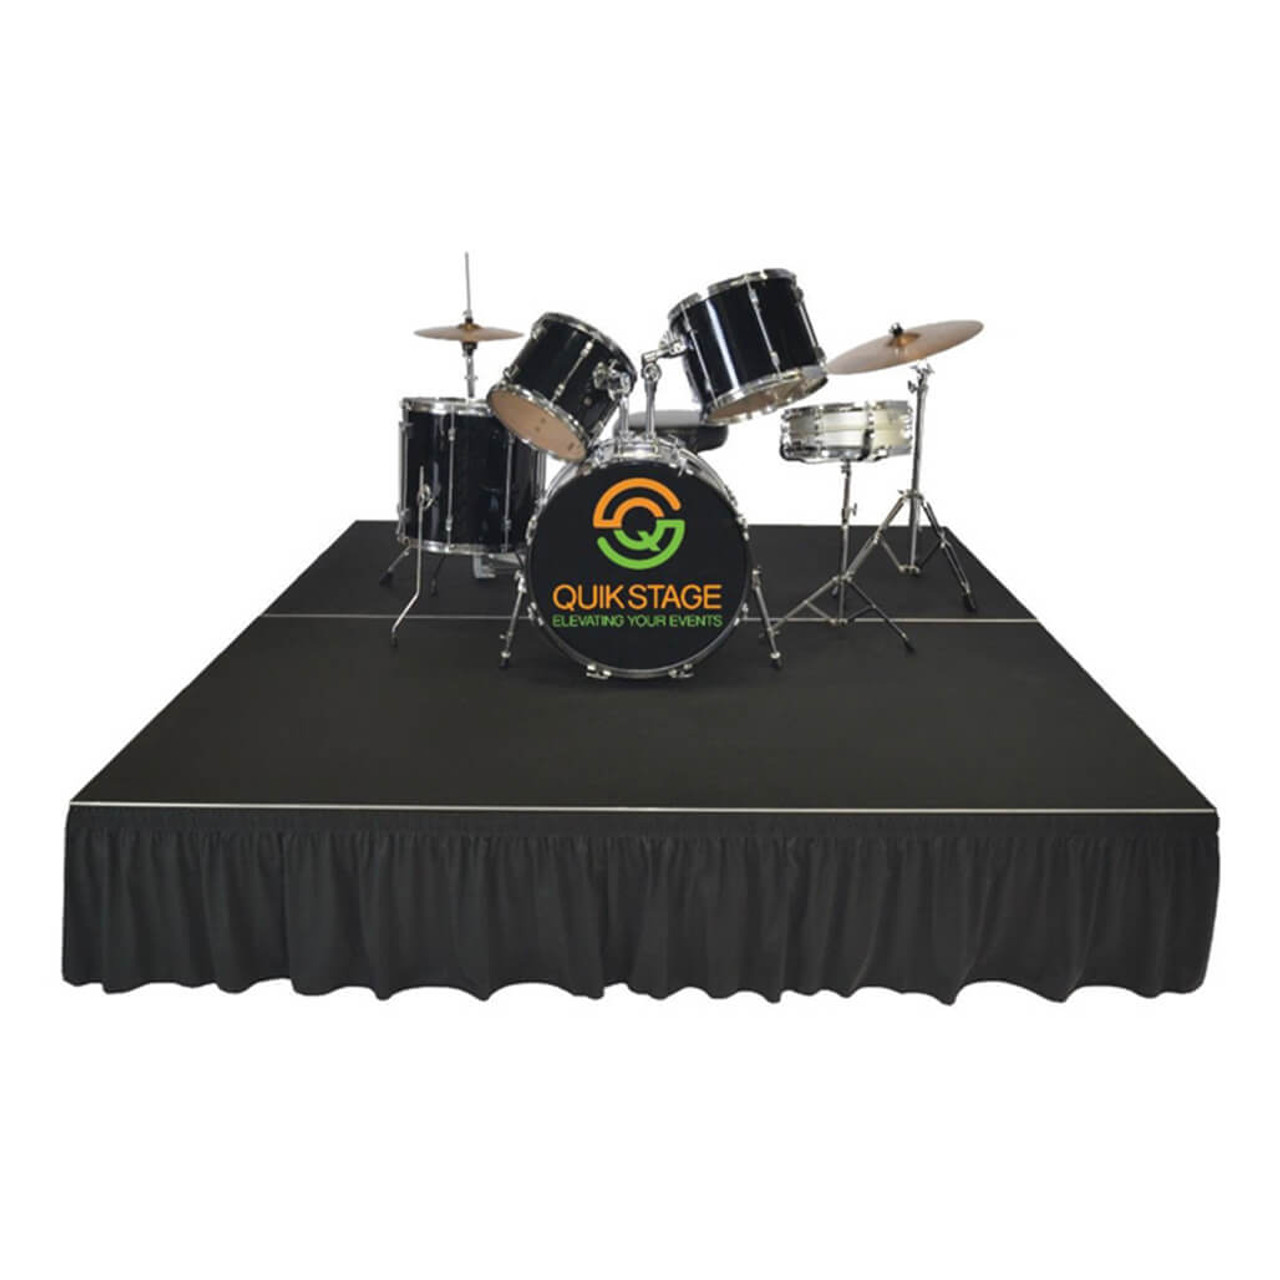 Top Rated Quik Stage 12' x 40' High Portable Stage Package with Black Polyvinyl Non-Skid Surface. Additional Heights and Surfaces Available - Drum Riser with skirting